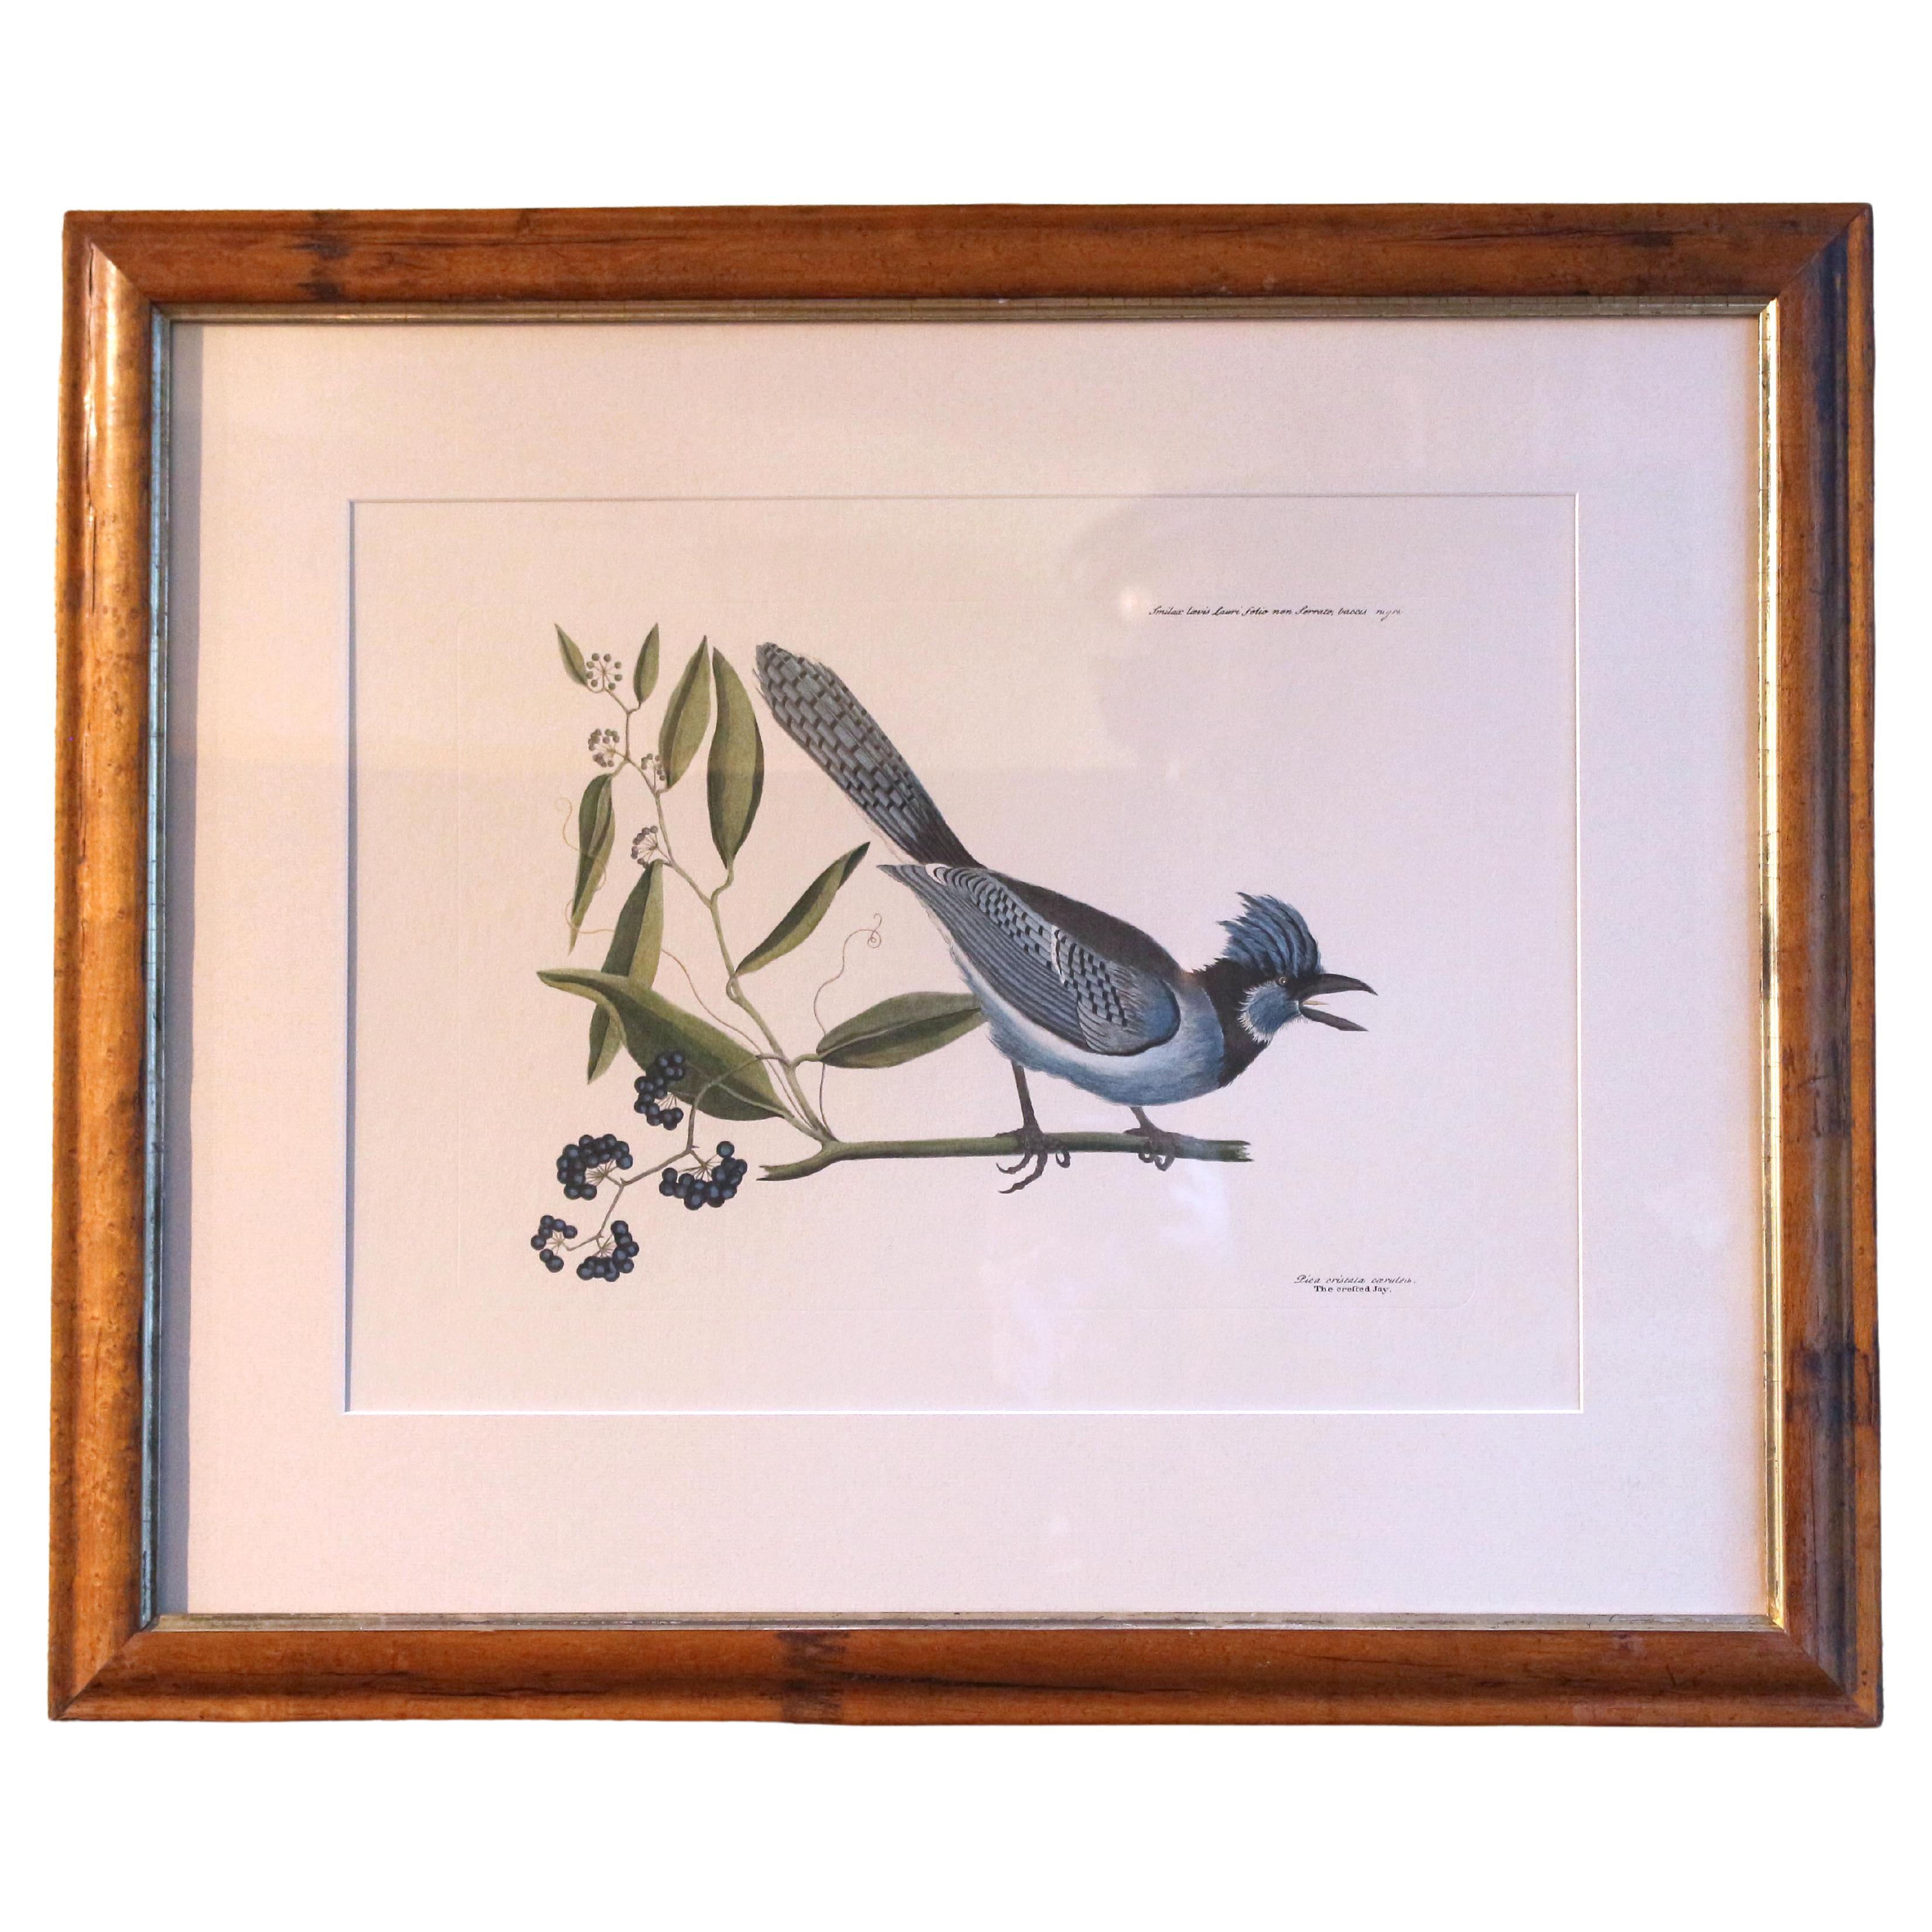 20th Century "The Crested Jay" Print, a Copy of the Engraving by Mark Catesby For Sale